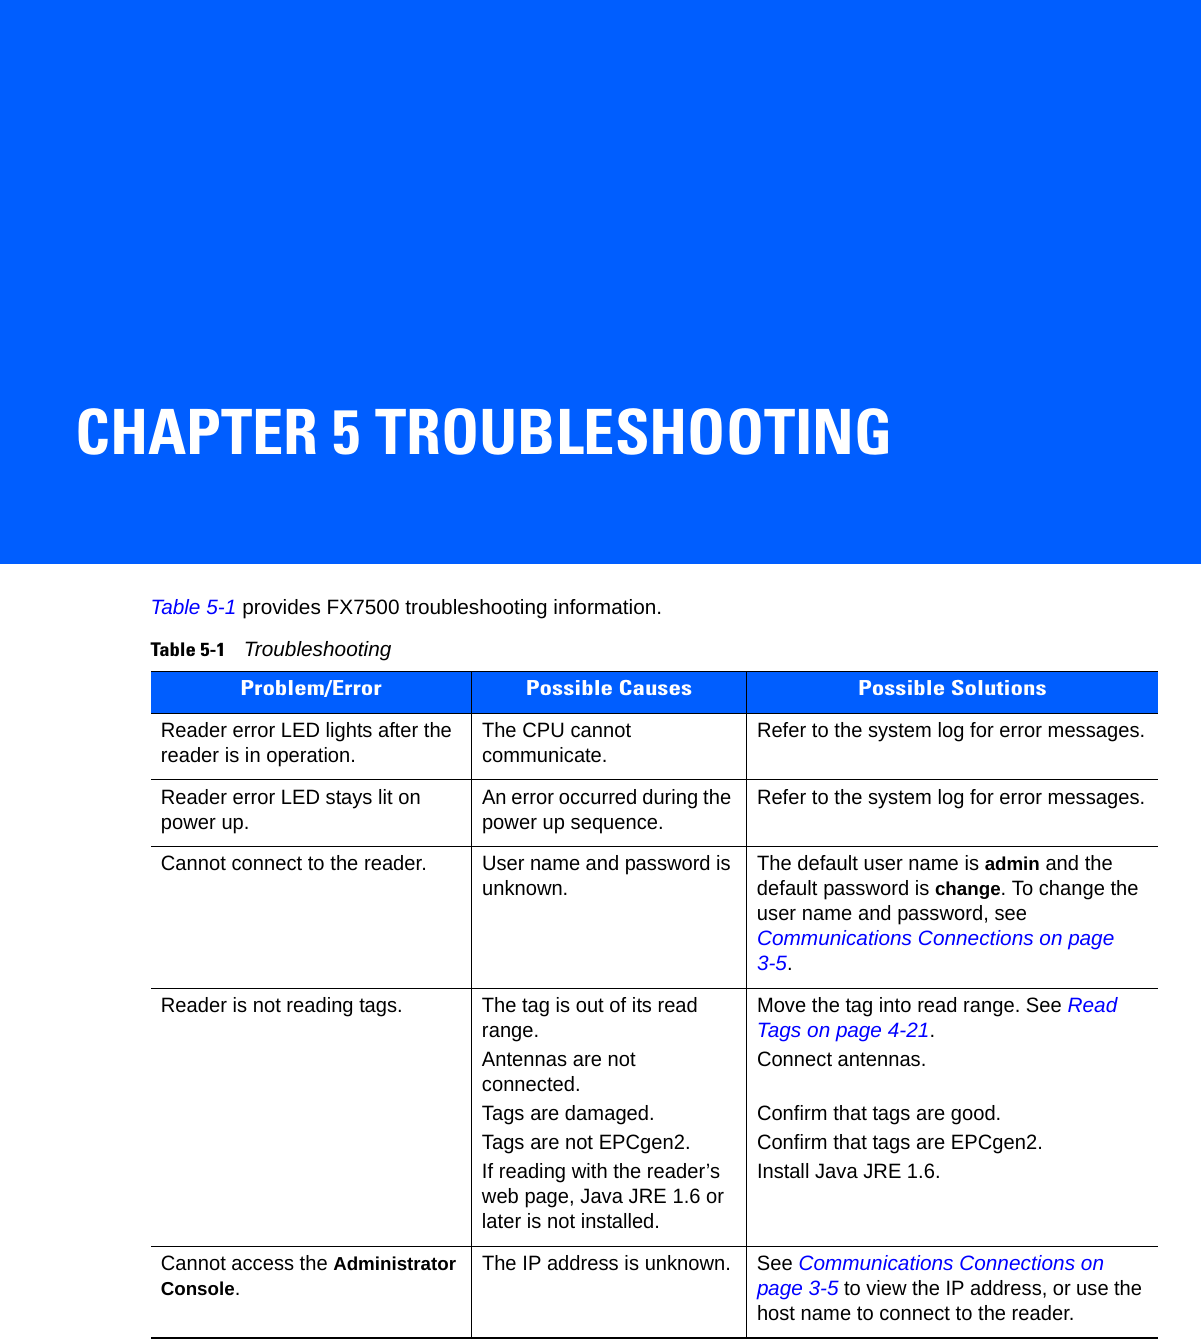 CHAPTER 5 TROUBLESHOOTINGTable 5-1 provides FX7500 troubleshooting information.Table 5-1    TroubleshootingProblem/Error Possible Causes Possible SolutionsReader error LED lights after the reader is in operation. The CPU cannot communicate. Refer to the system log for error messages.Reader error LED stays lit on power up. An error occurred during the power up sequence. Refer to the system log for error messages.Cannot connect to the reader. User name and password is unknown. The default user name is admin and the default password is change. To change the user name and password, see Communications Connections on page 3-5.Reader is not reading tags. The tag is out of its read range.Antennas are not connected.Tags are damaged.Tags are not EPCgen2.If reading with the reader’s web page, Java JRE 1.6 or later is not installed.Move the tag into read range. See Read Tags on page 4-21.Connect antennas.Confirm that tags are good.Confirm that tags are EPCgen2.Install Java JRE 1.6. Cannot access the Administrator Console.The IP address is unknown. See Communications Connections on page 3-5 to view the IP address, or use the host name to connect to the reader.